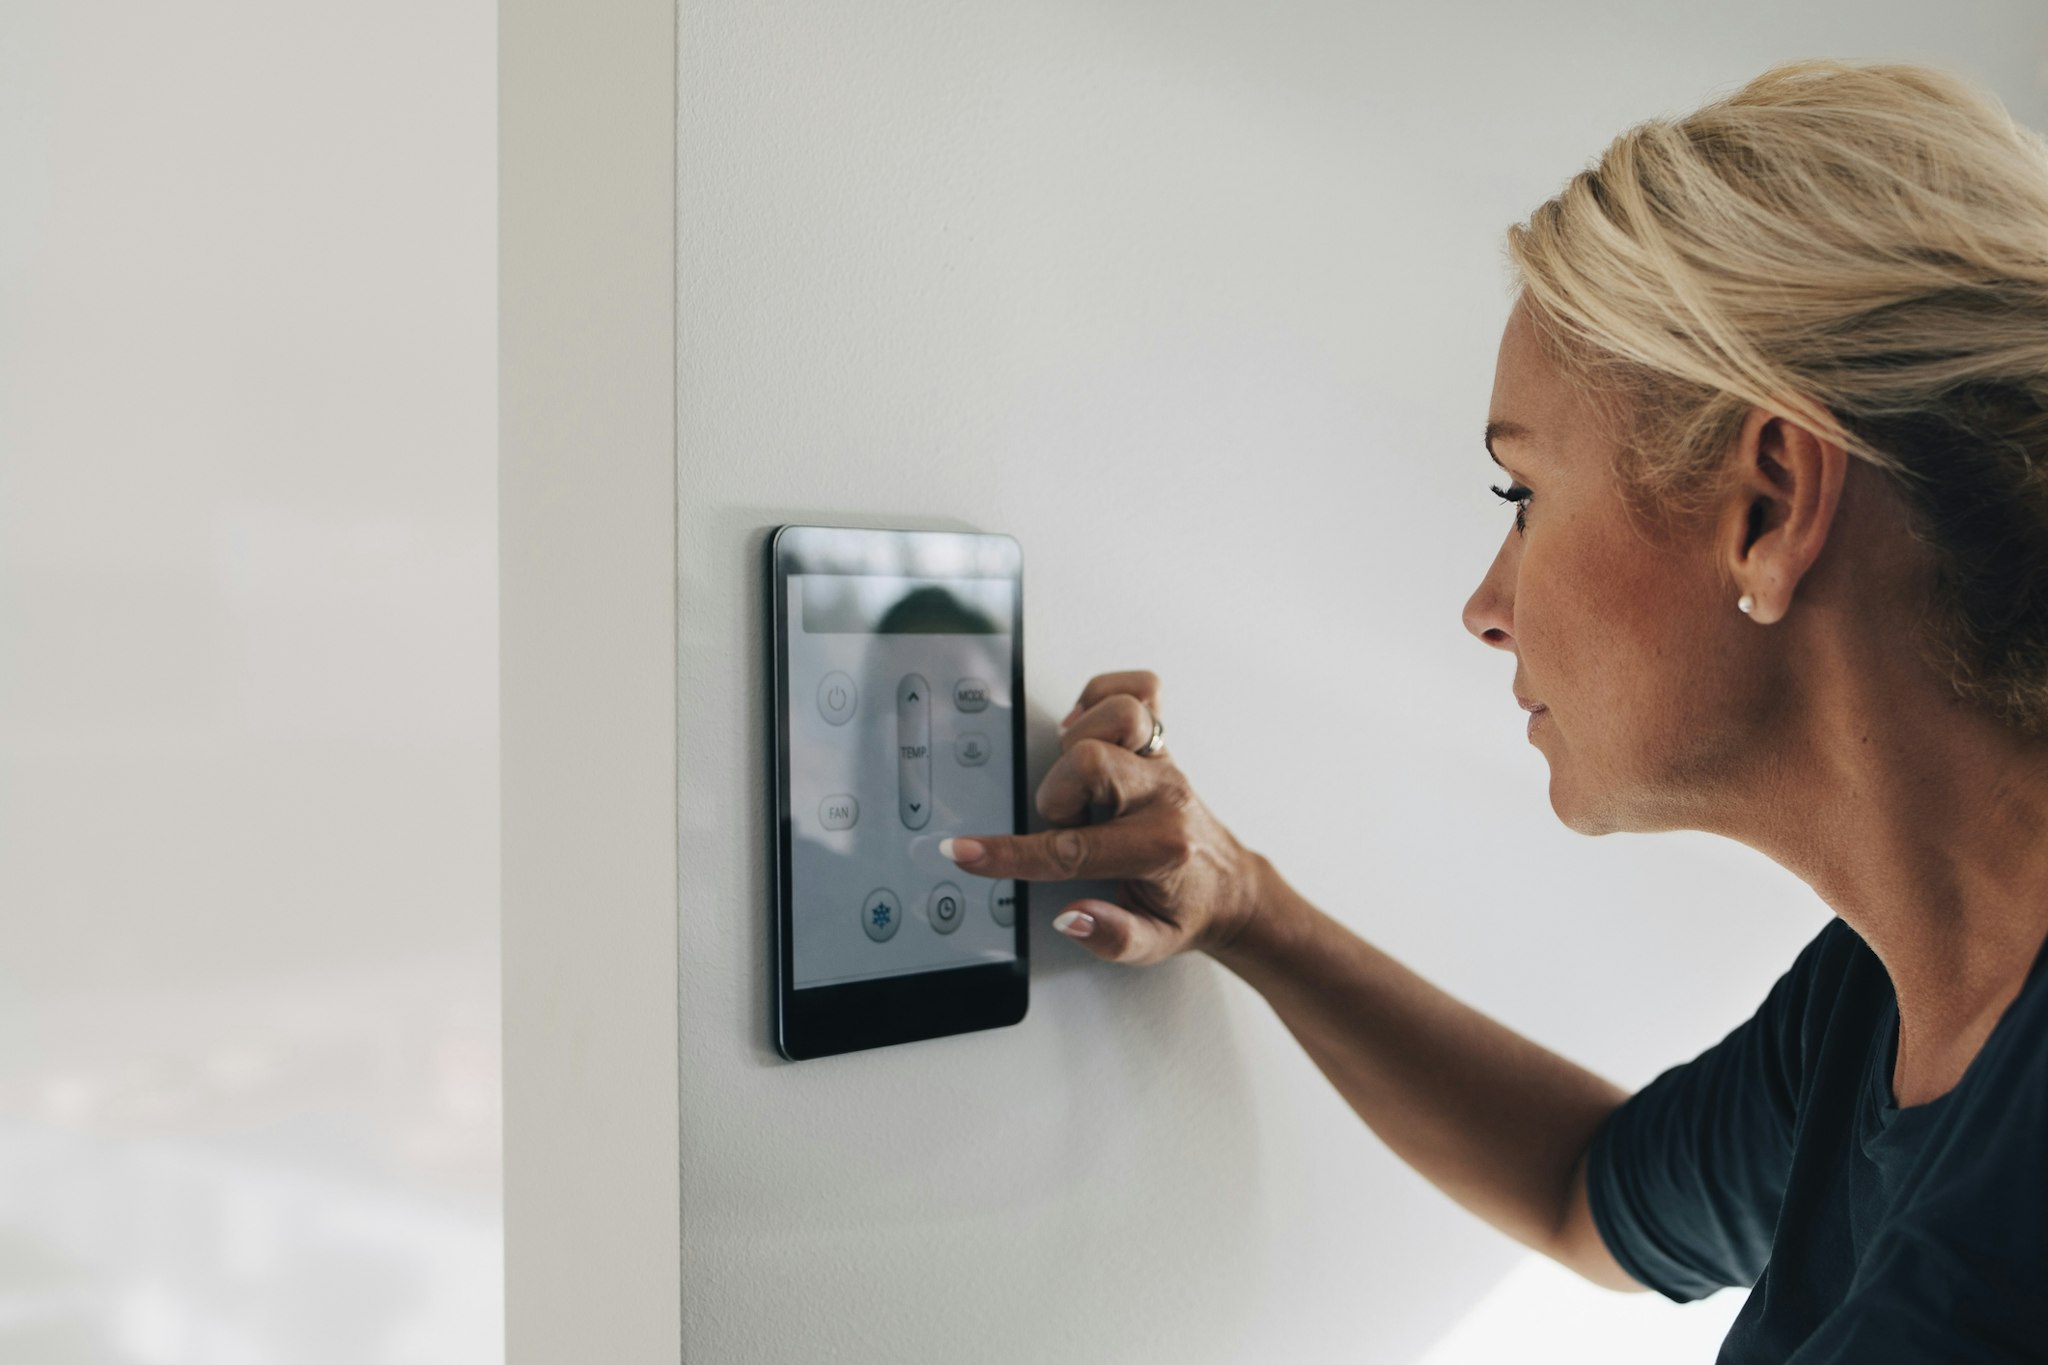 Blond woman adjusting thermostat using digital tablet mounted on white wall at home - stock photo